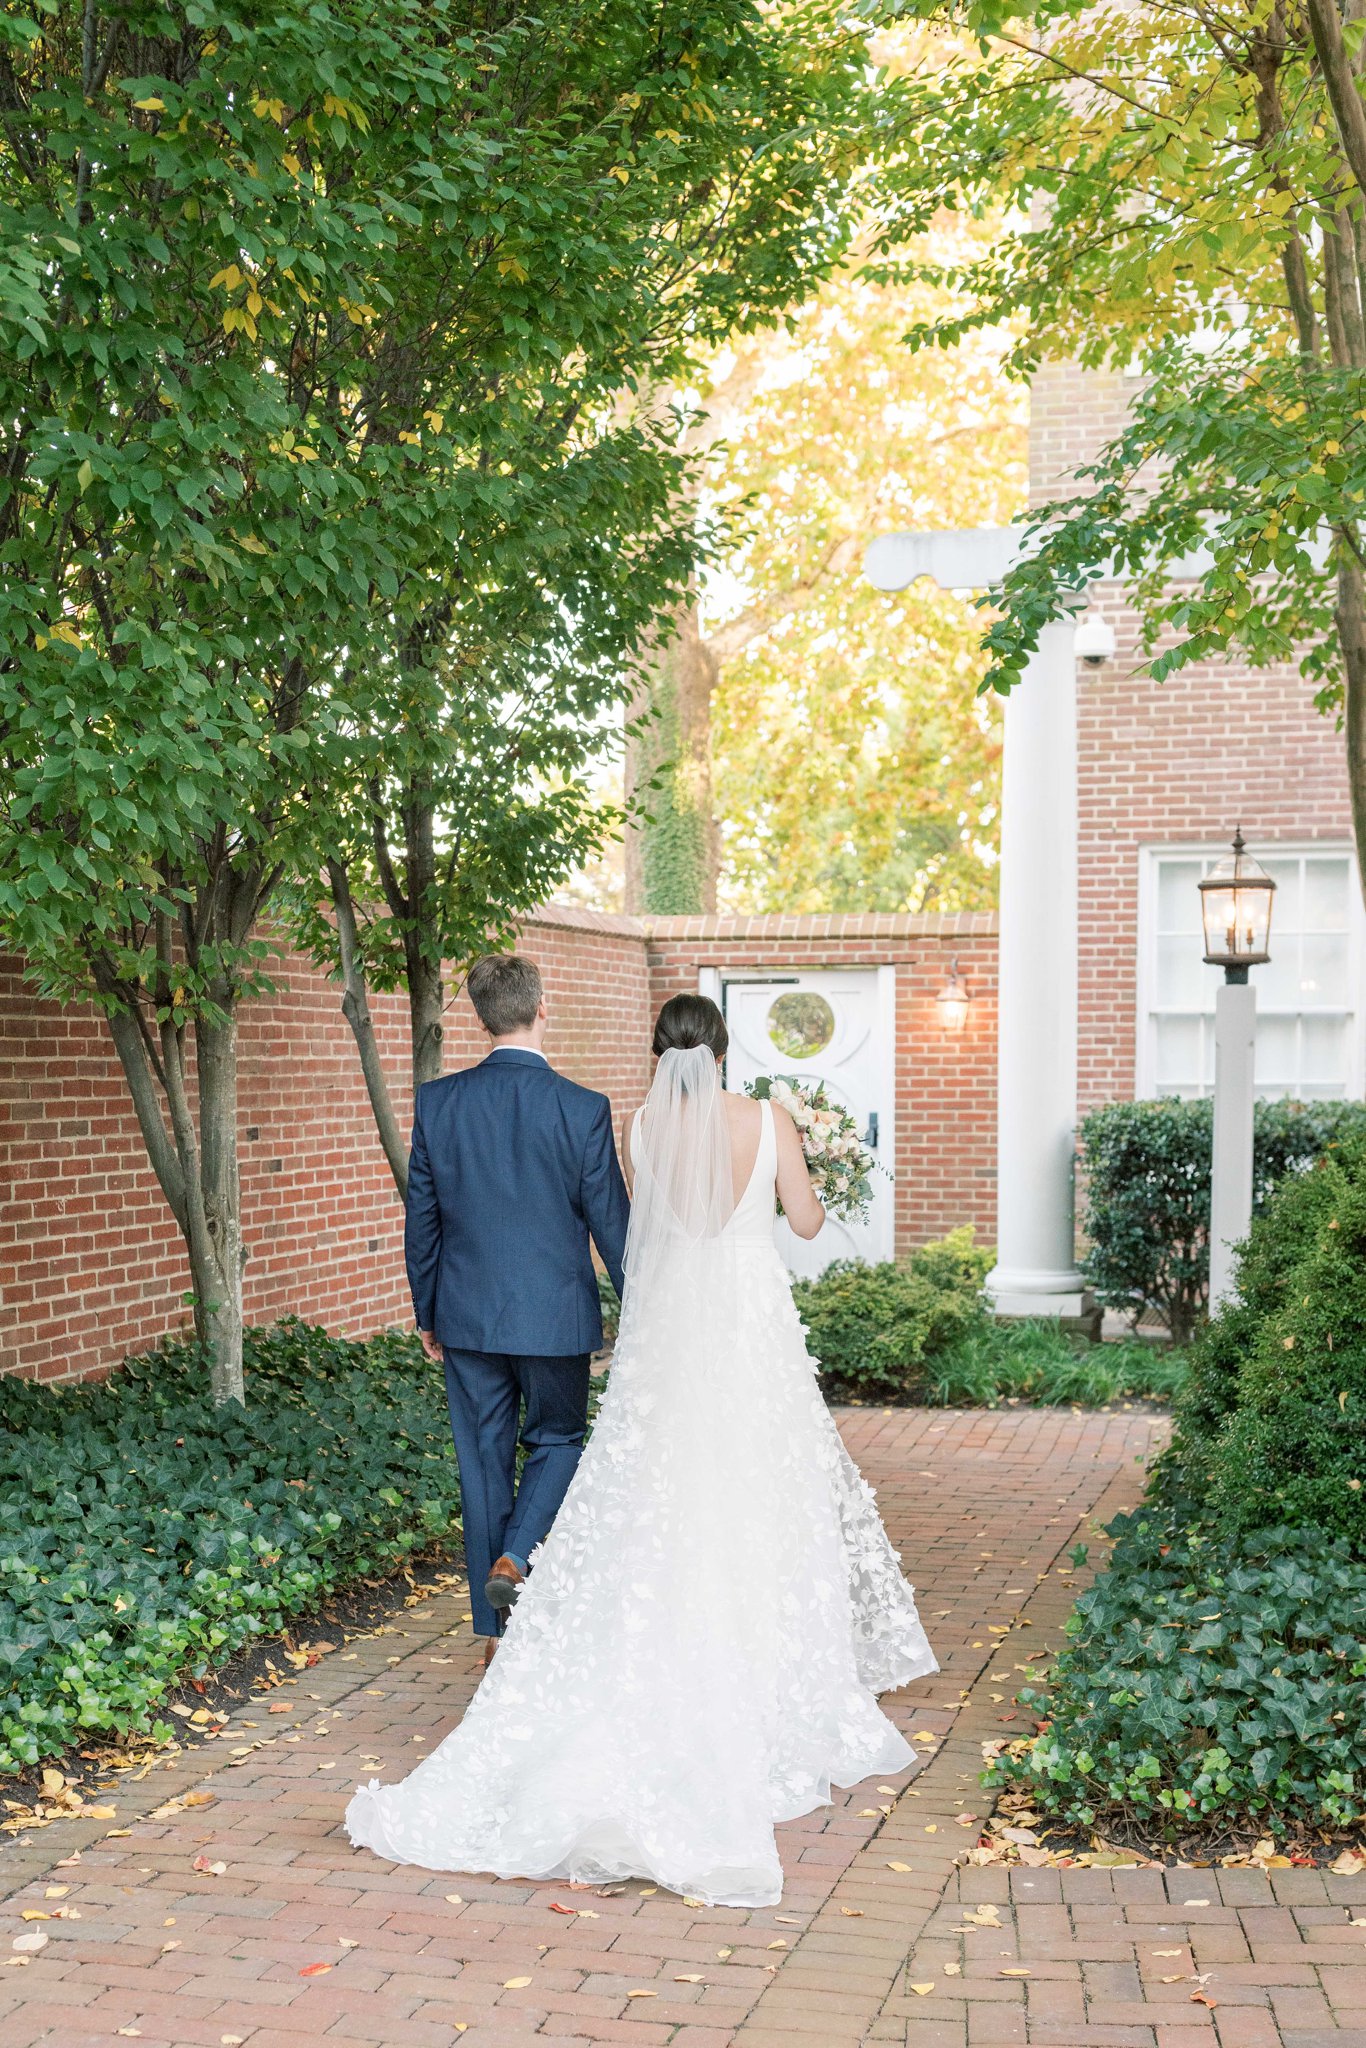 A romantic fall wedding at the Tidewater Inn in Easton, MD.